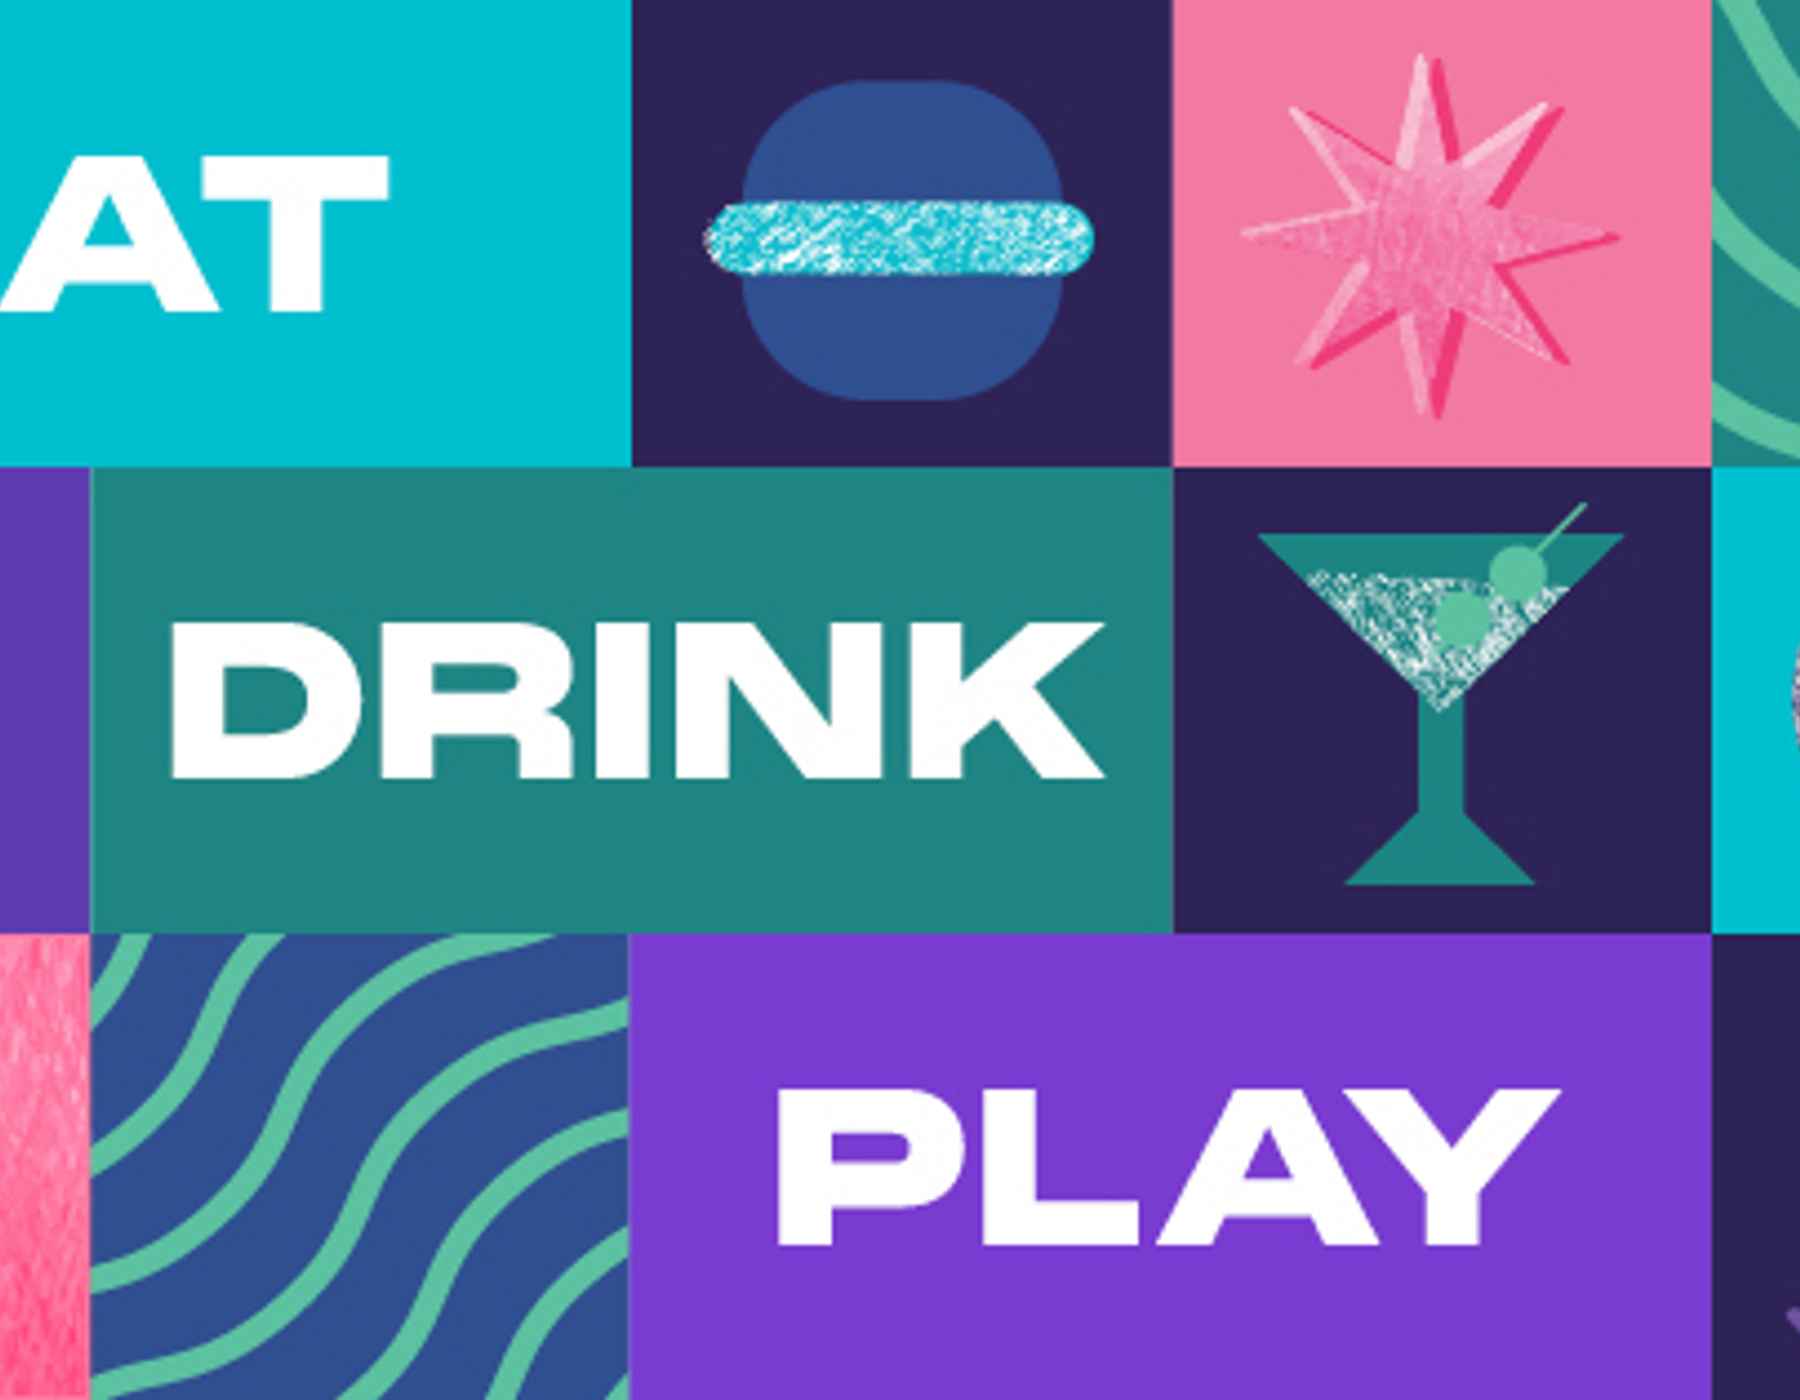 Be in to WIN with Eat, Drink, Play Wellington